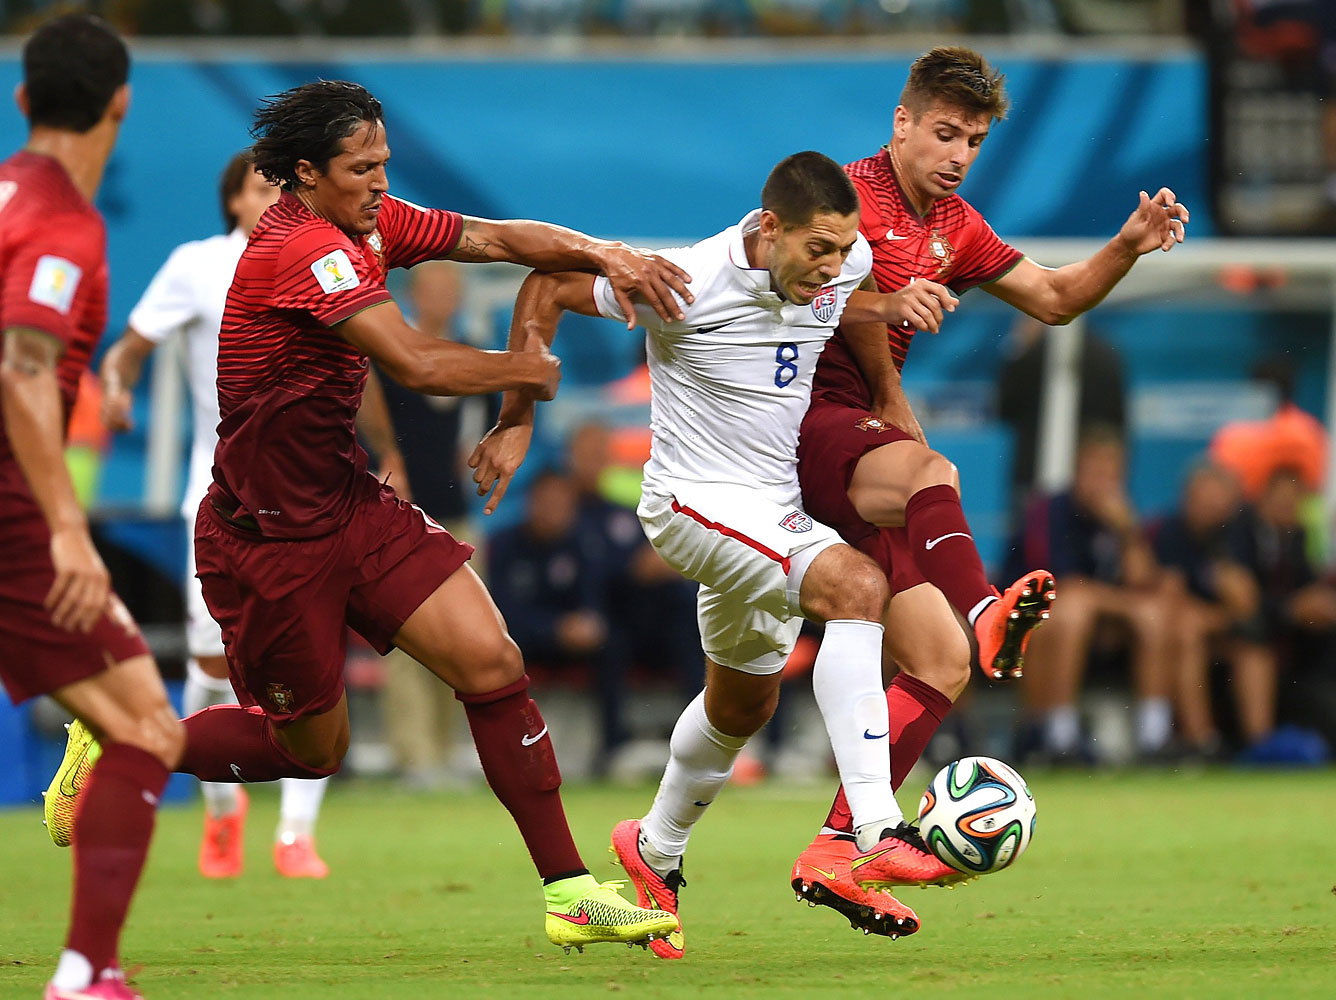 United States' Clint Dempsey, centre, is challenged by Portugal's Bruno Alves, left, and Portugal's Miguel Veloso, right.